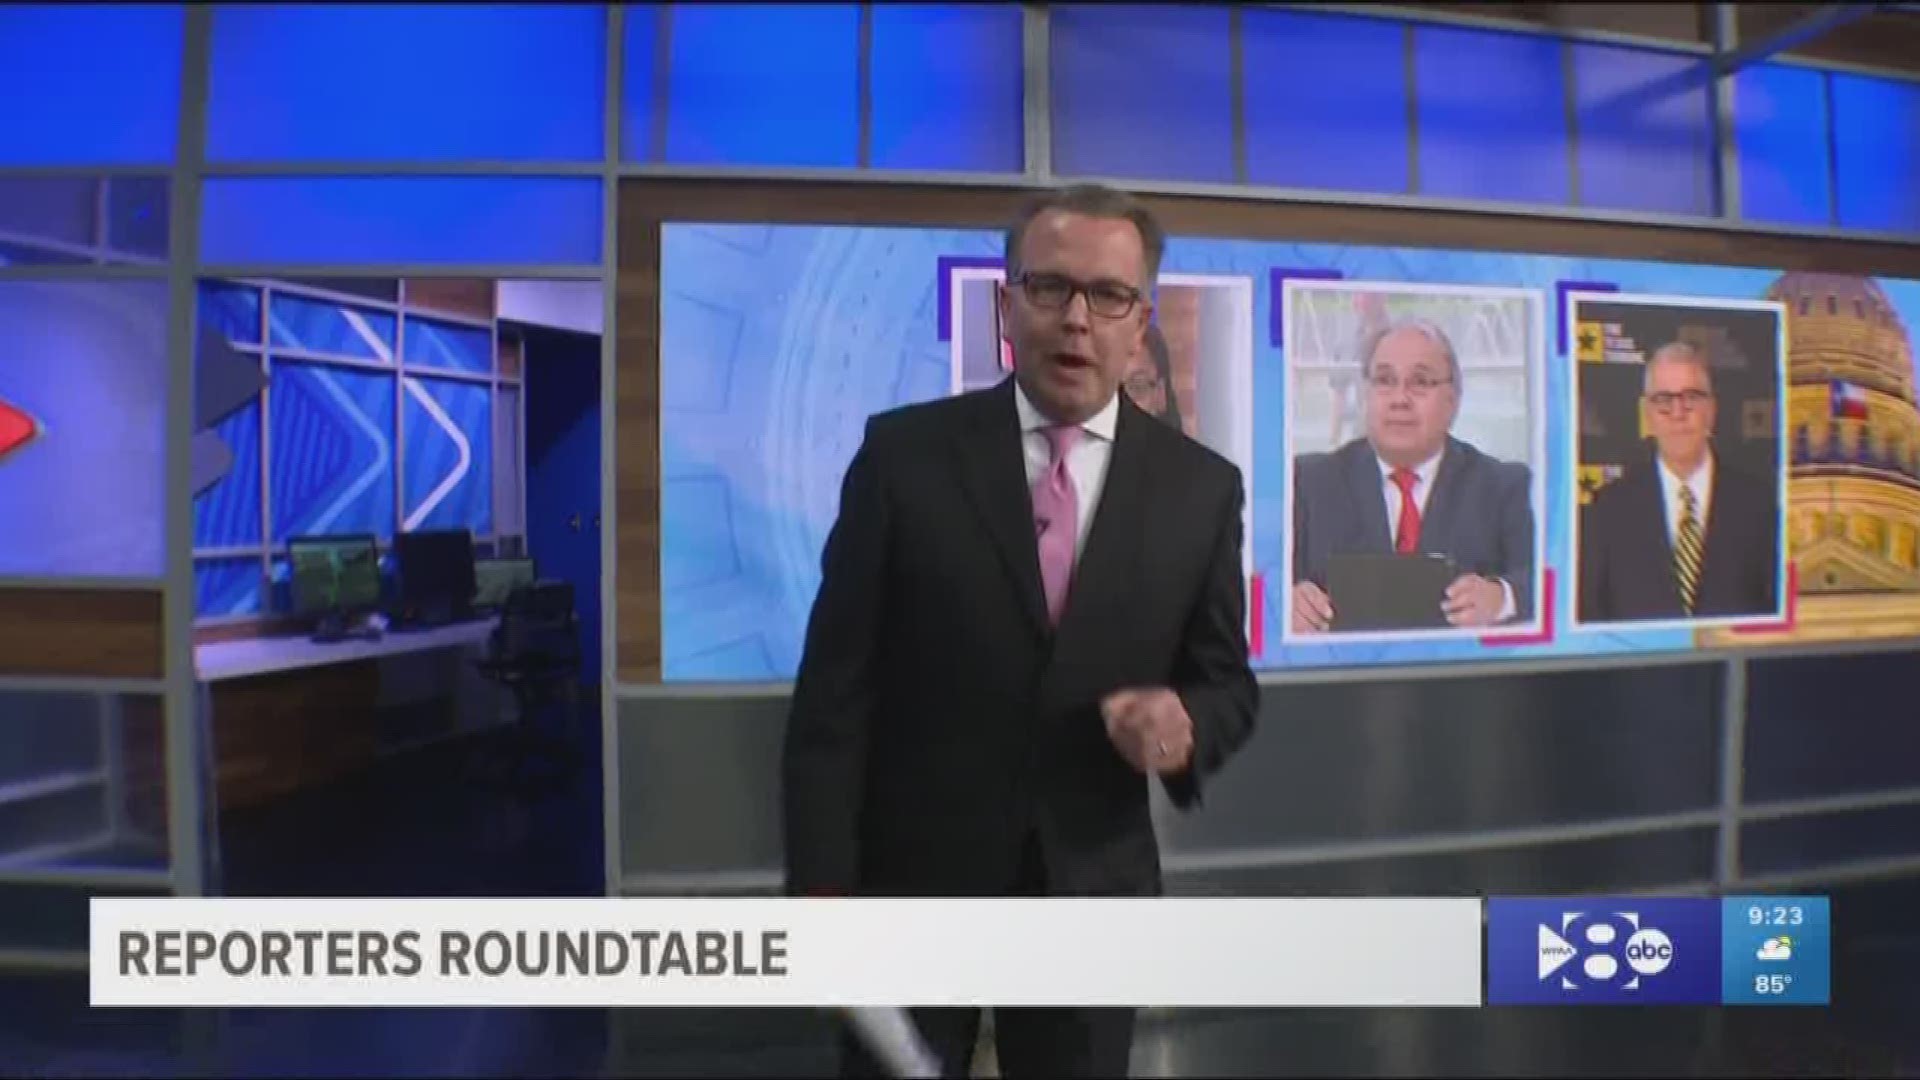 Reporters roundtable puts the headlines in perspective each week. Ross and Bud returned. Patrick Washington, the CEO and co-publisher of the Dallas Weekly filled in for Berna Dean Steptoe, WFAA's political producer. All three journalists discussed the so-